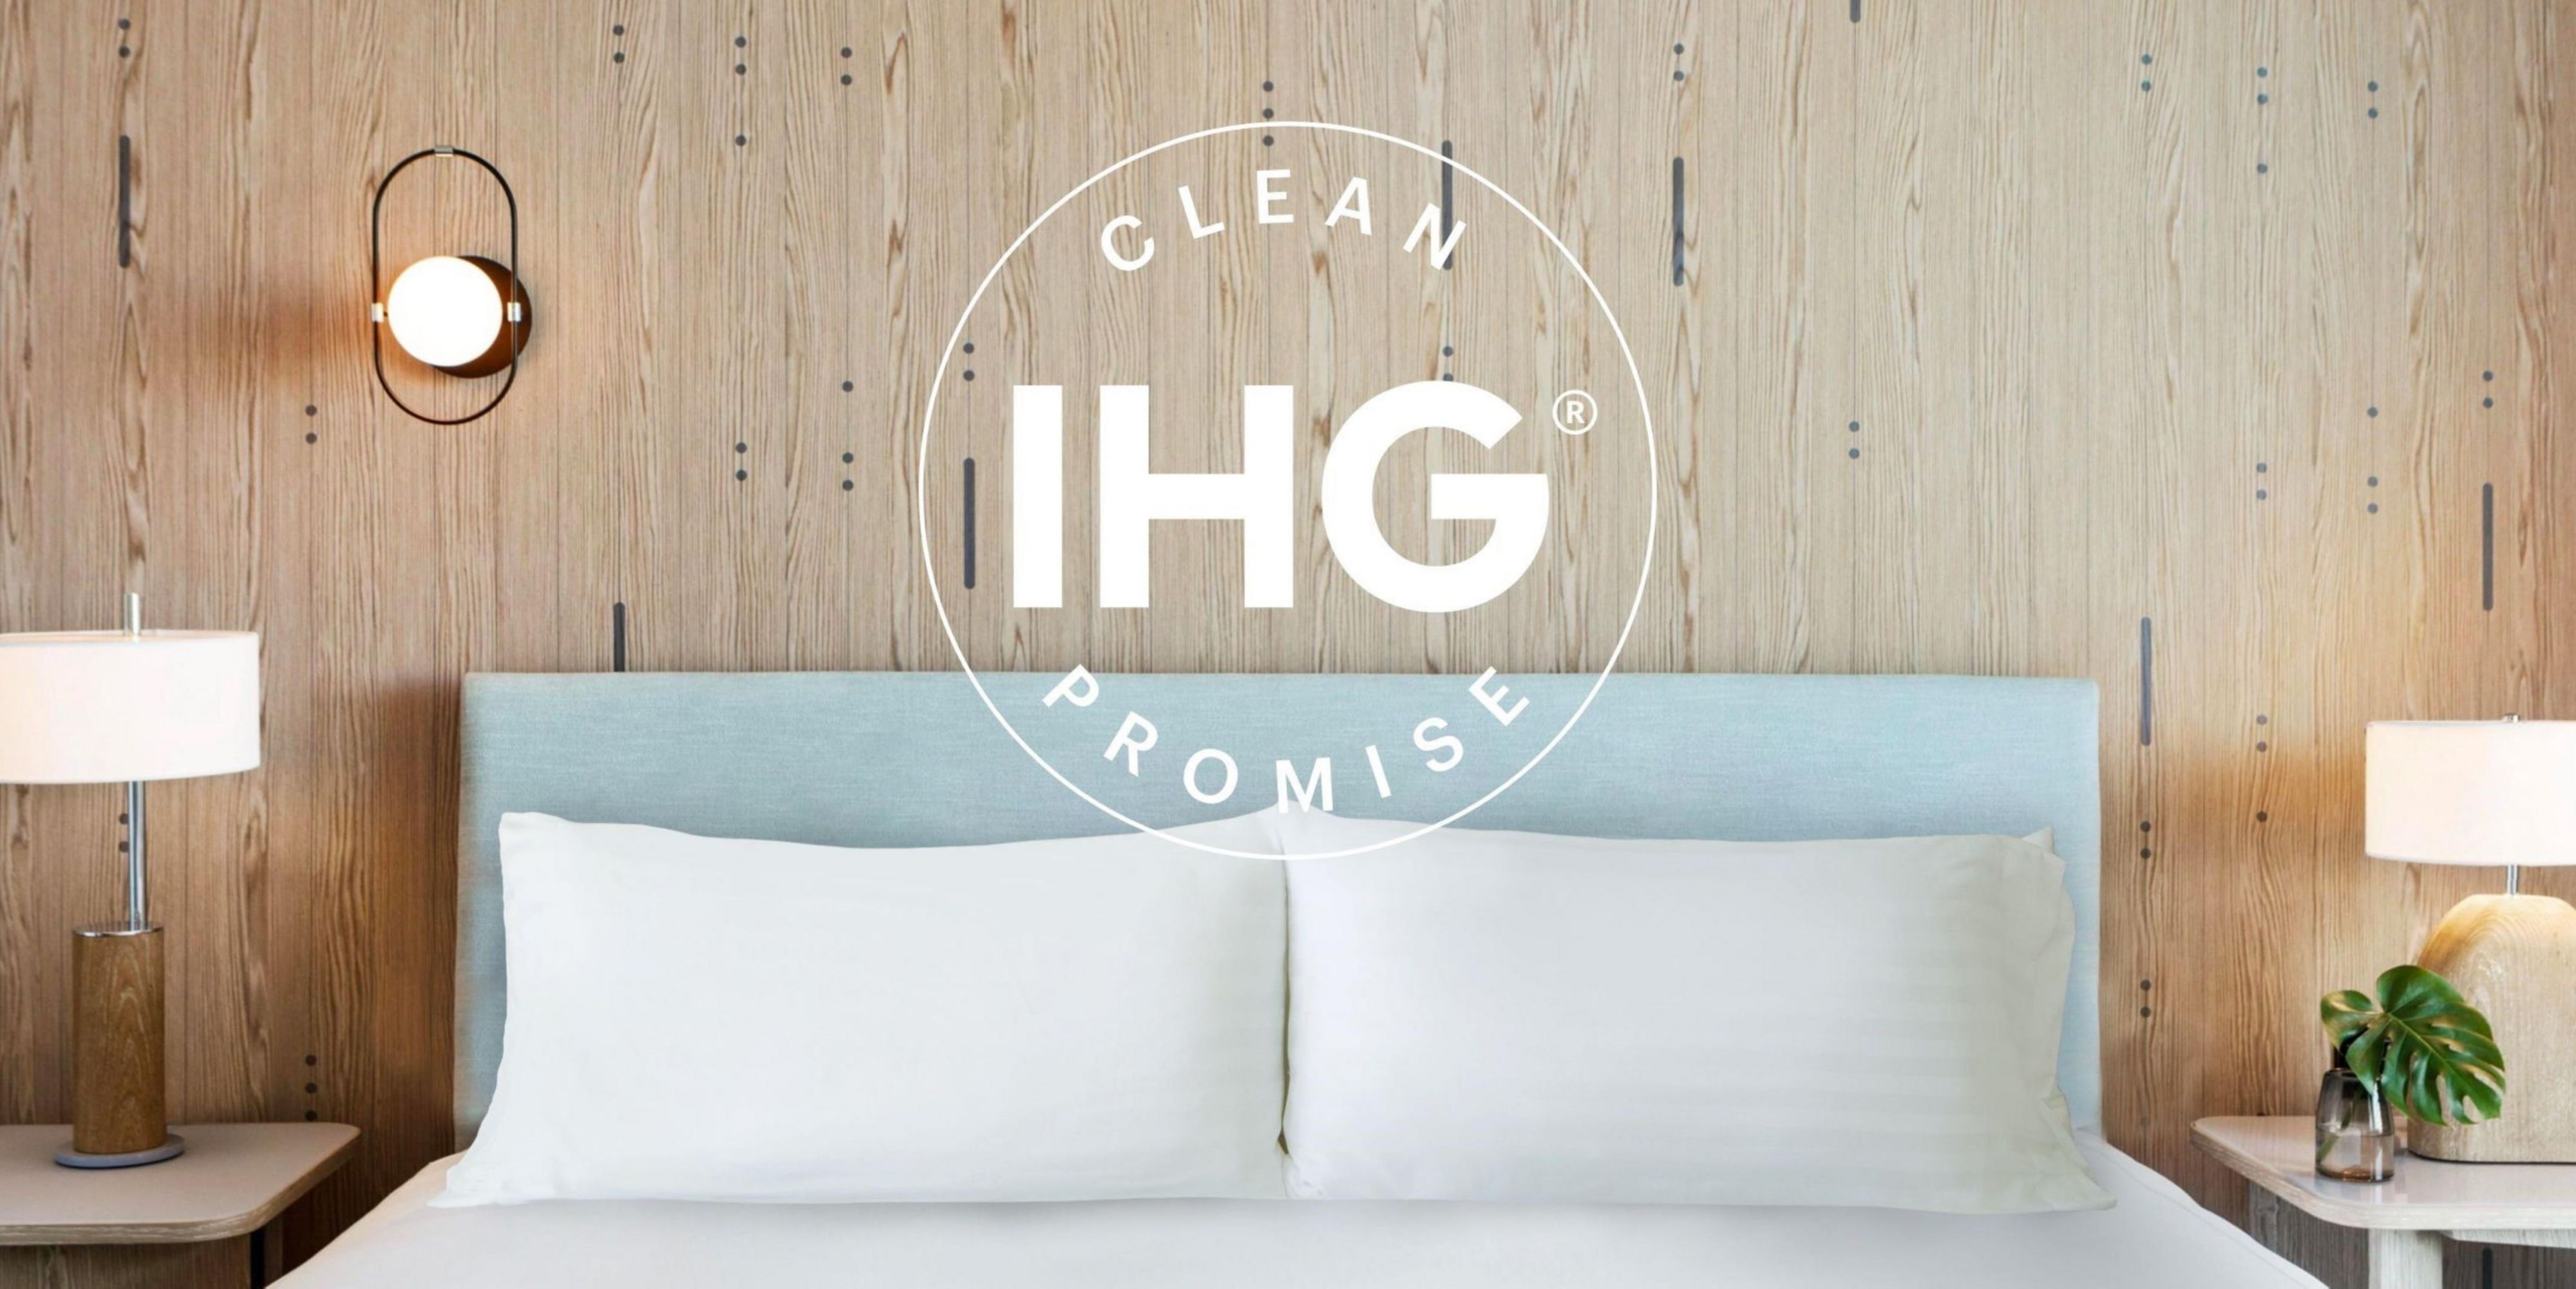 IHG Way of Clean includes deep cleaning with hospital-grade disinfectants, and guests can expect to see enhanced procedures, which include: face covering requirements, various ways to reduce contact throughout the hotel, social distancing measures with public spaces, and procedures based on local authorities' guidance and/or advice.